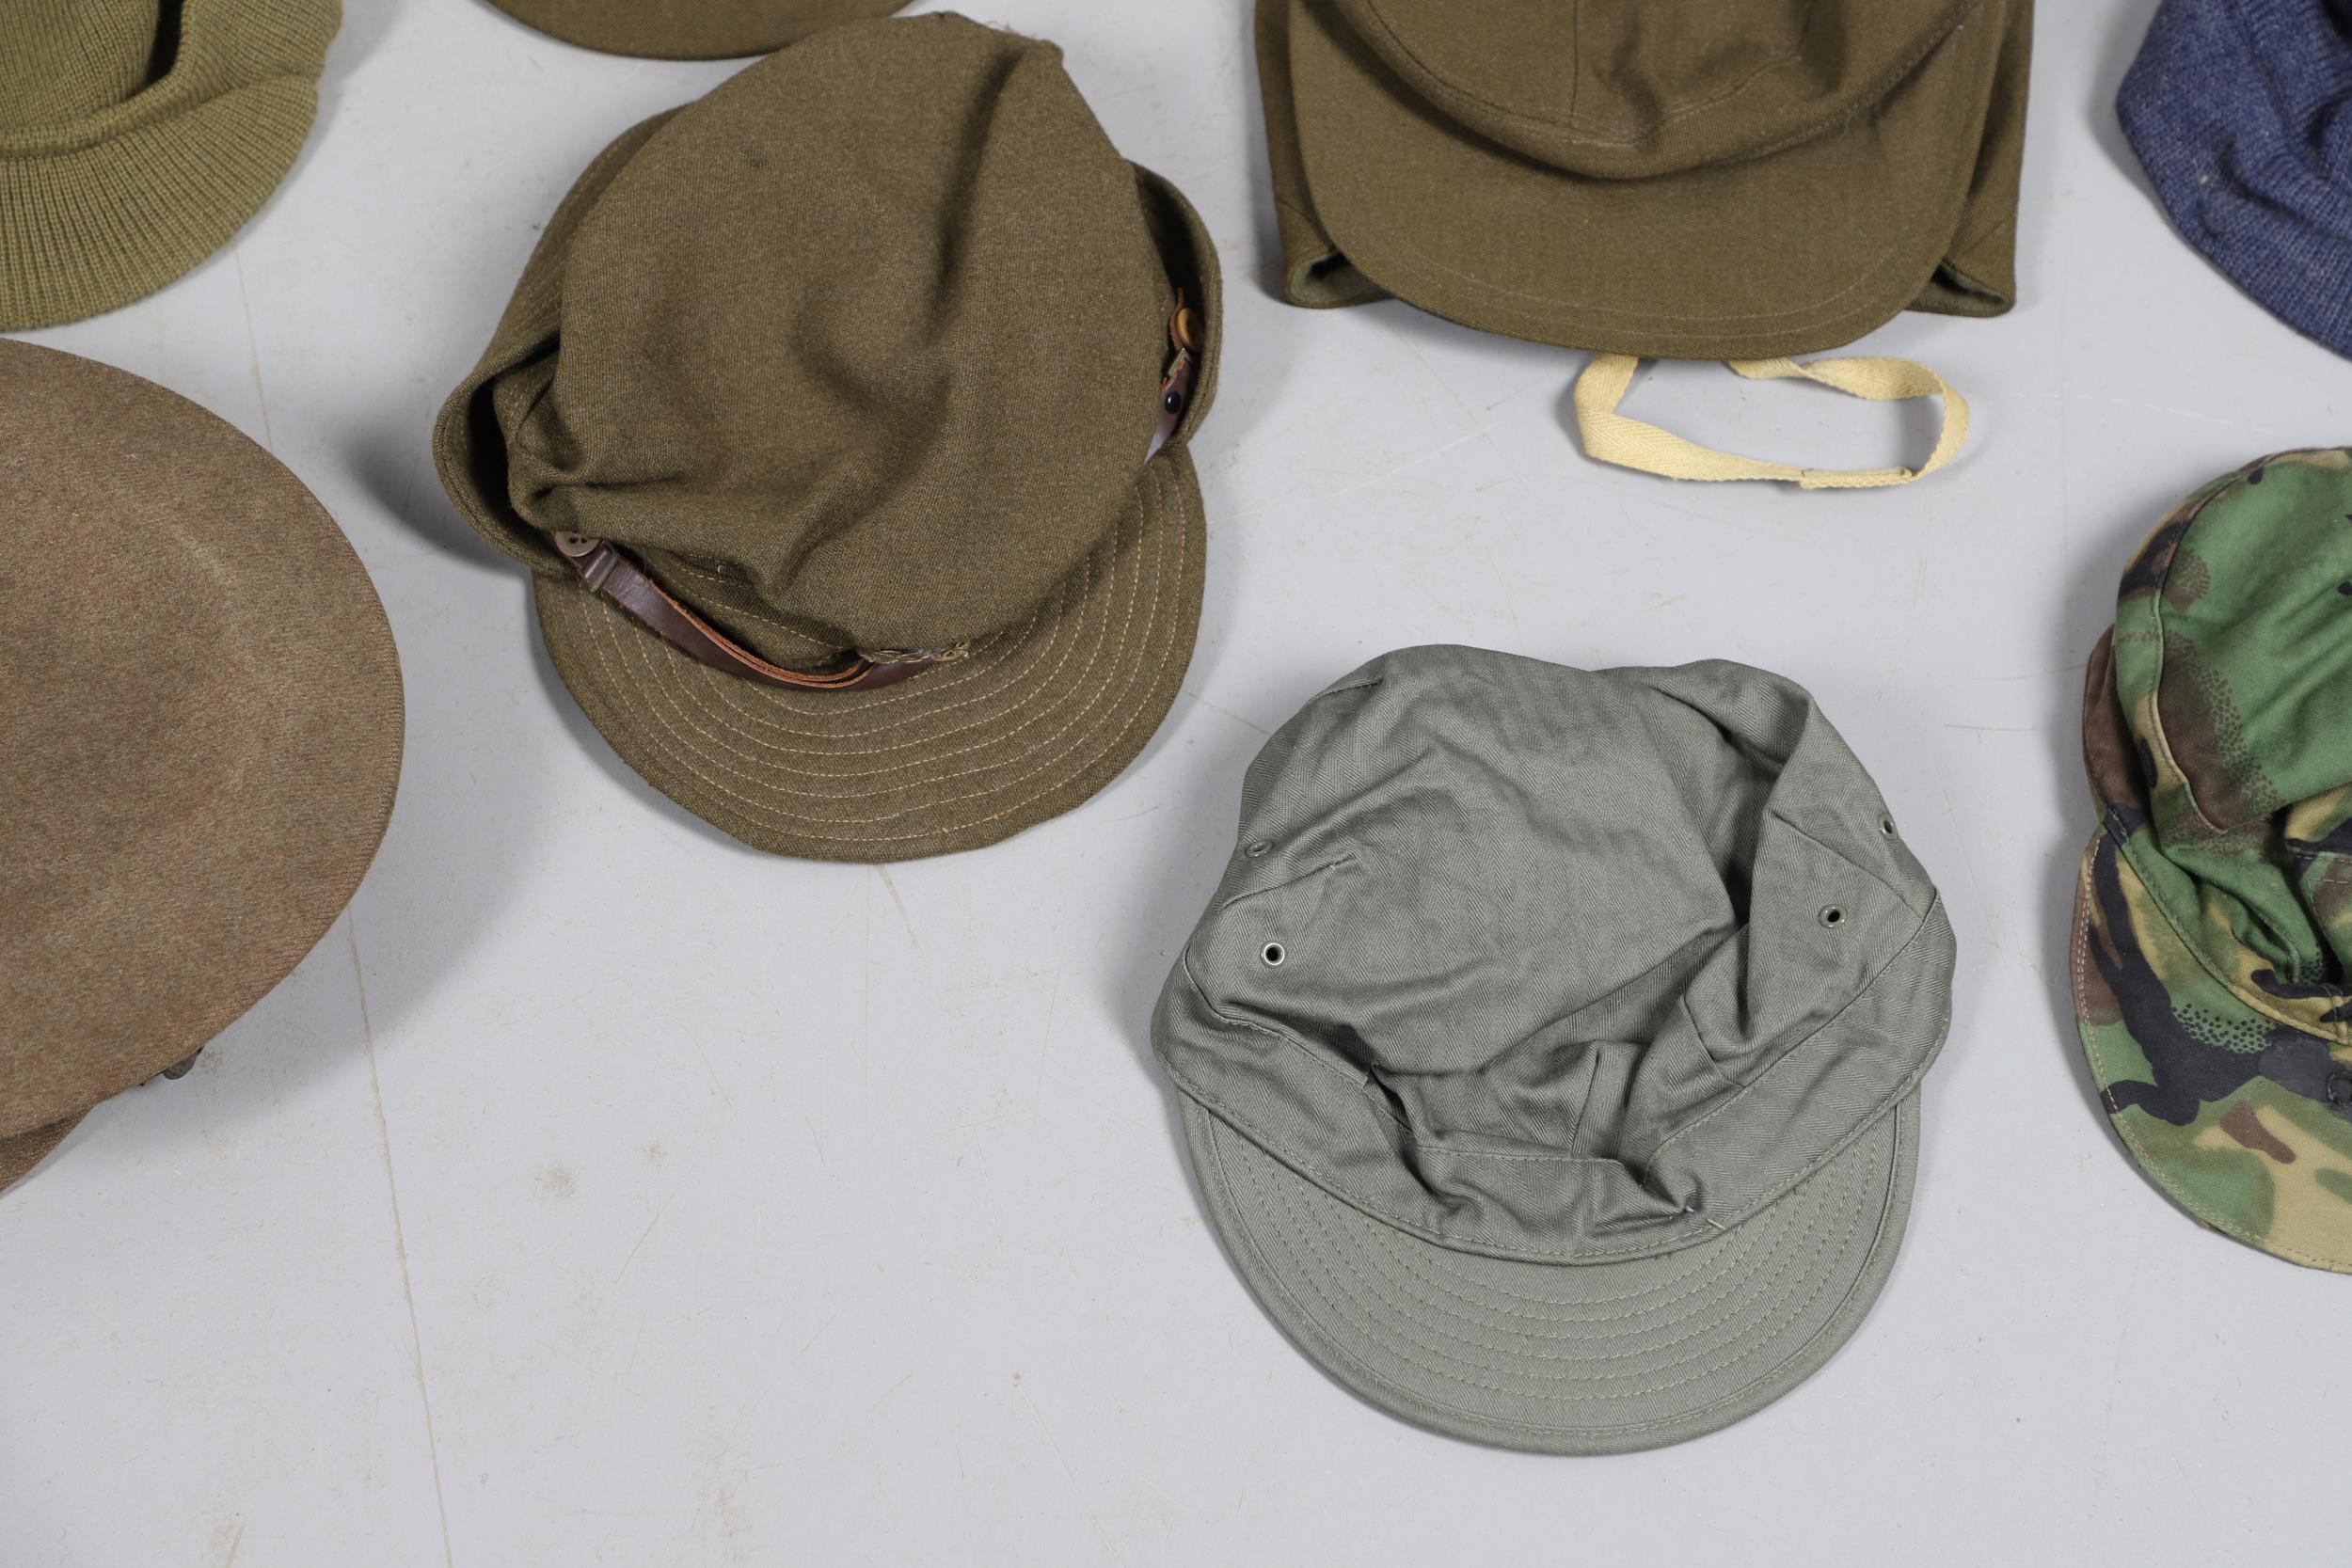 AN EXTENSIVE COLLECTION OF MILITARY UNIFORM CAPS, BERETS AND OTHER ITEMS. SECOND WORLD WAR AND LATER - Image 10 of 17